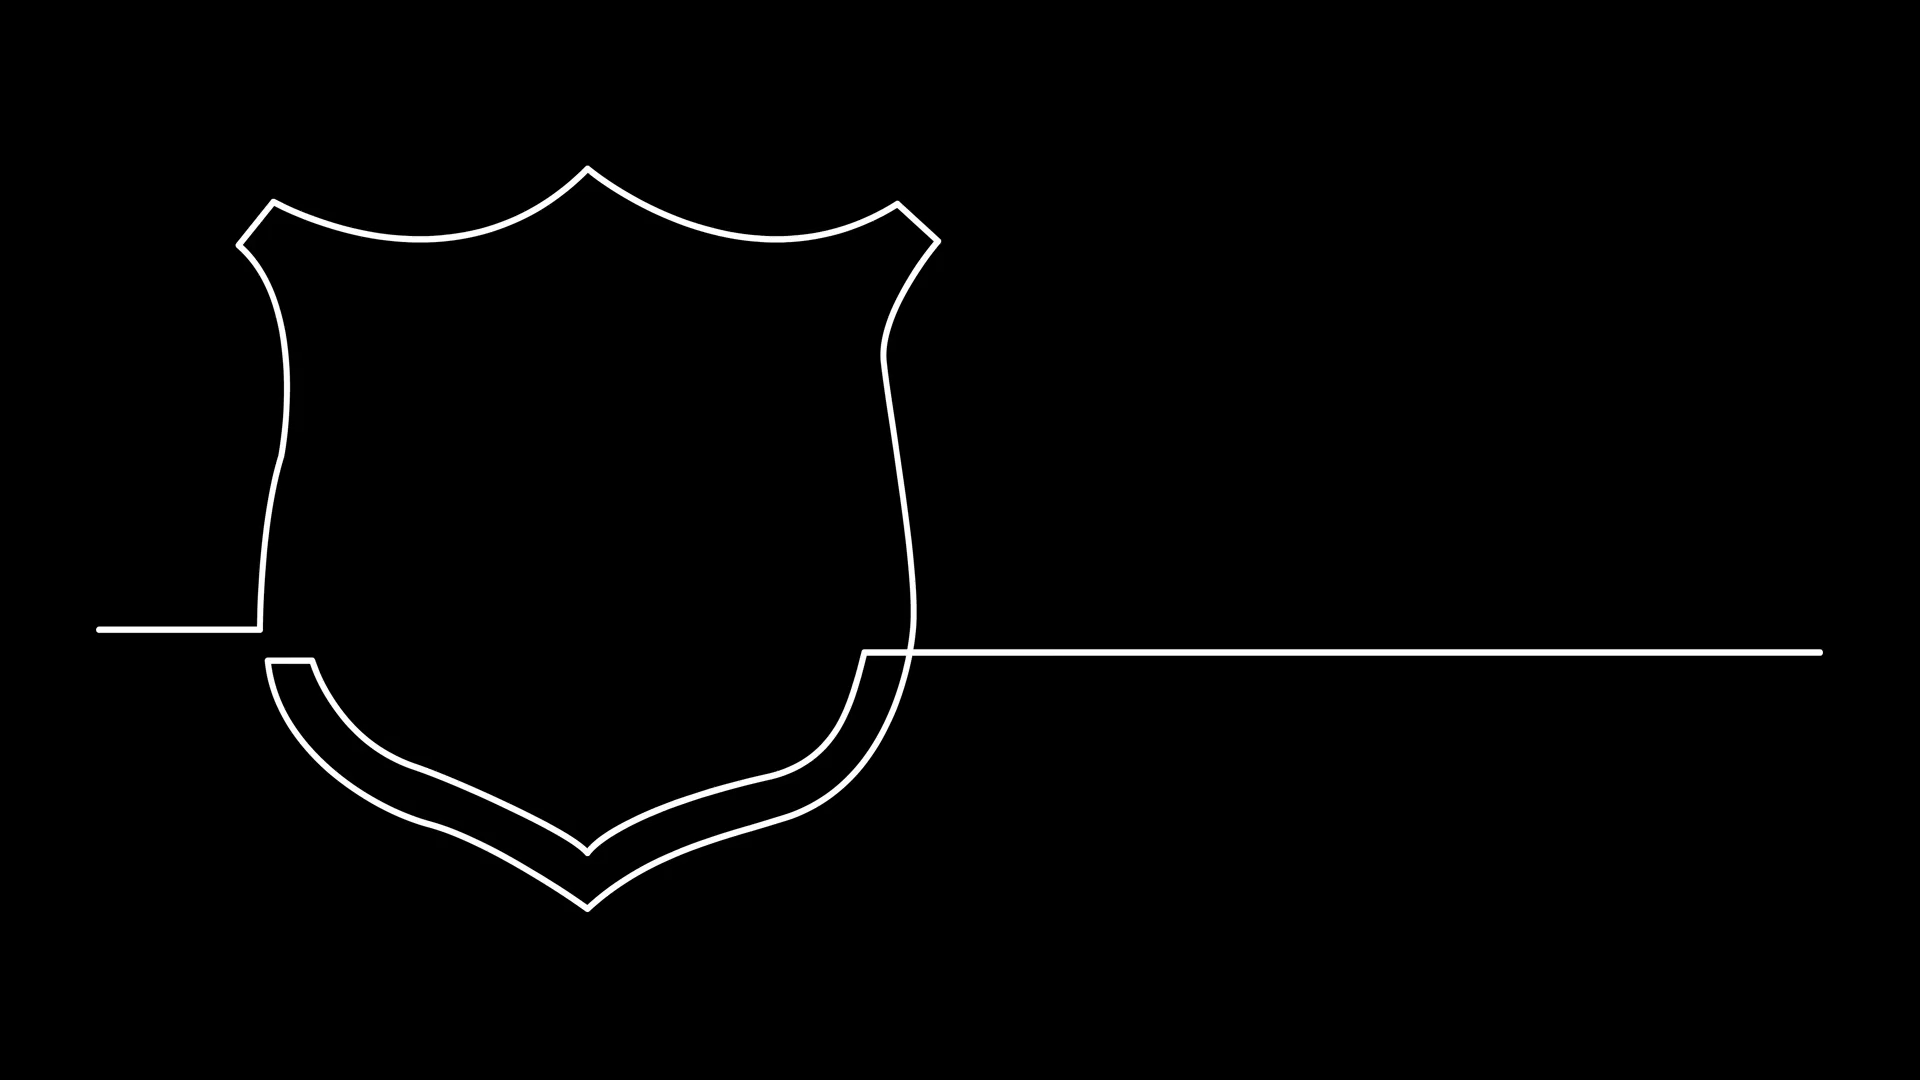 continuous line drawing of protective shield on black background